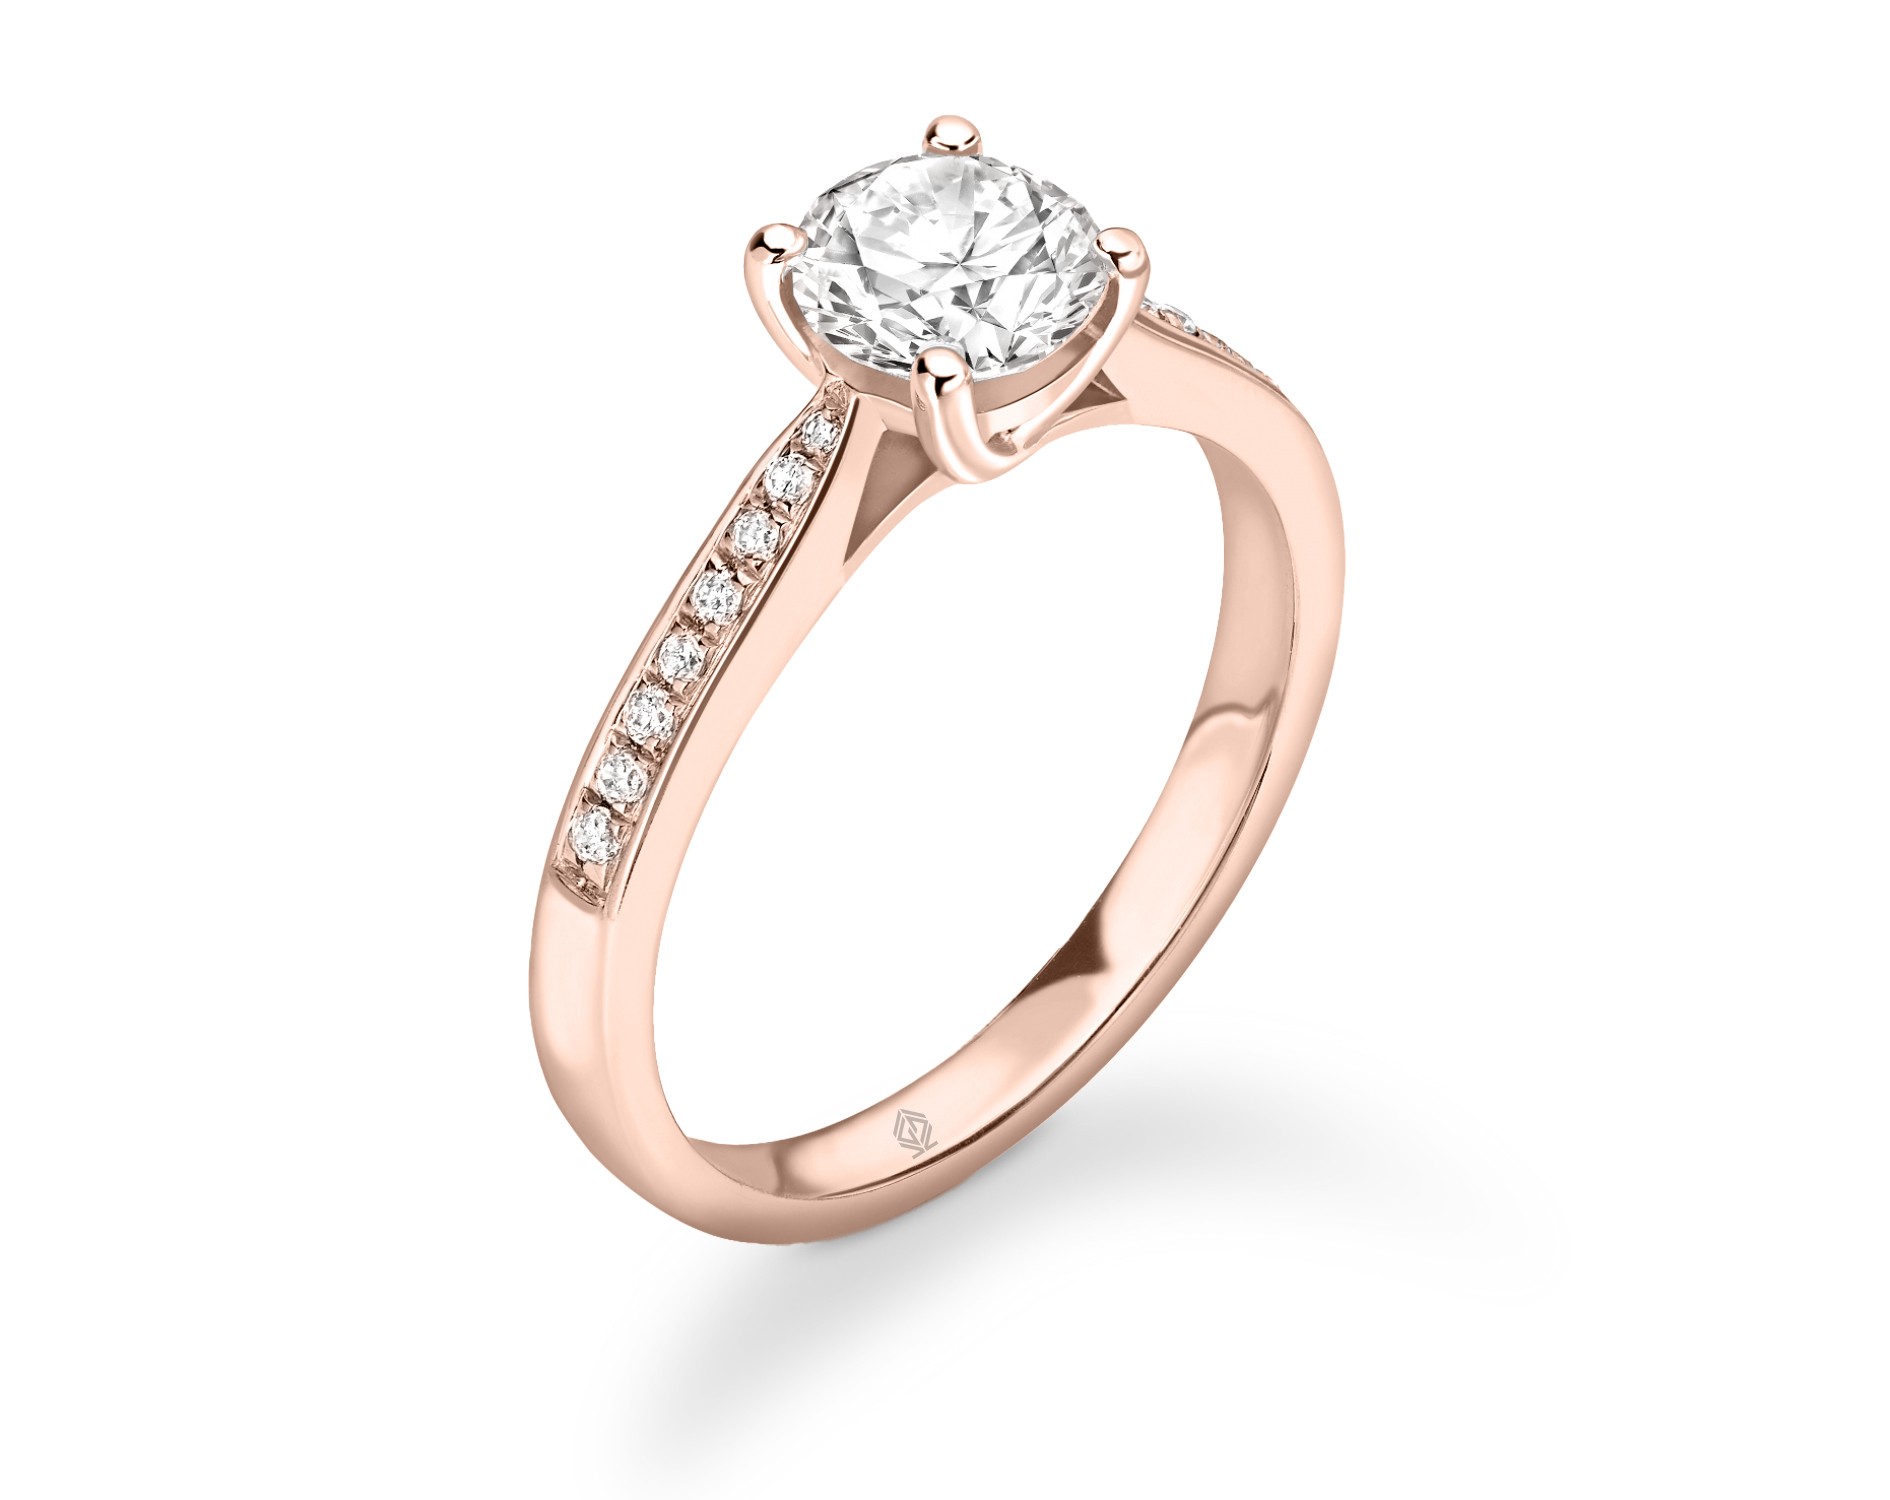 18K ROSE GOLD ROUND CUT DIAMOND RING WITH SIDE STONES CHANNEL SET